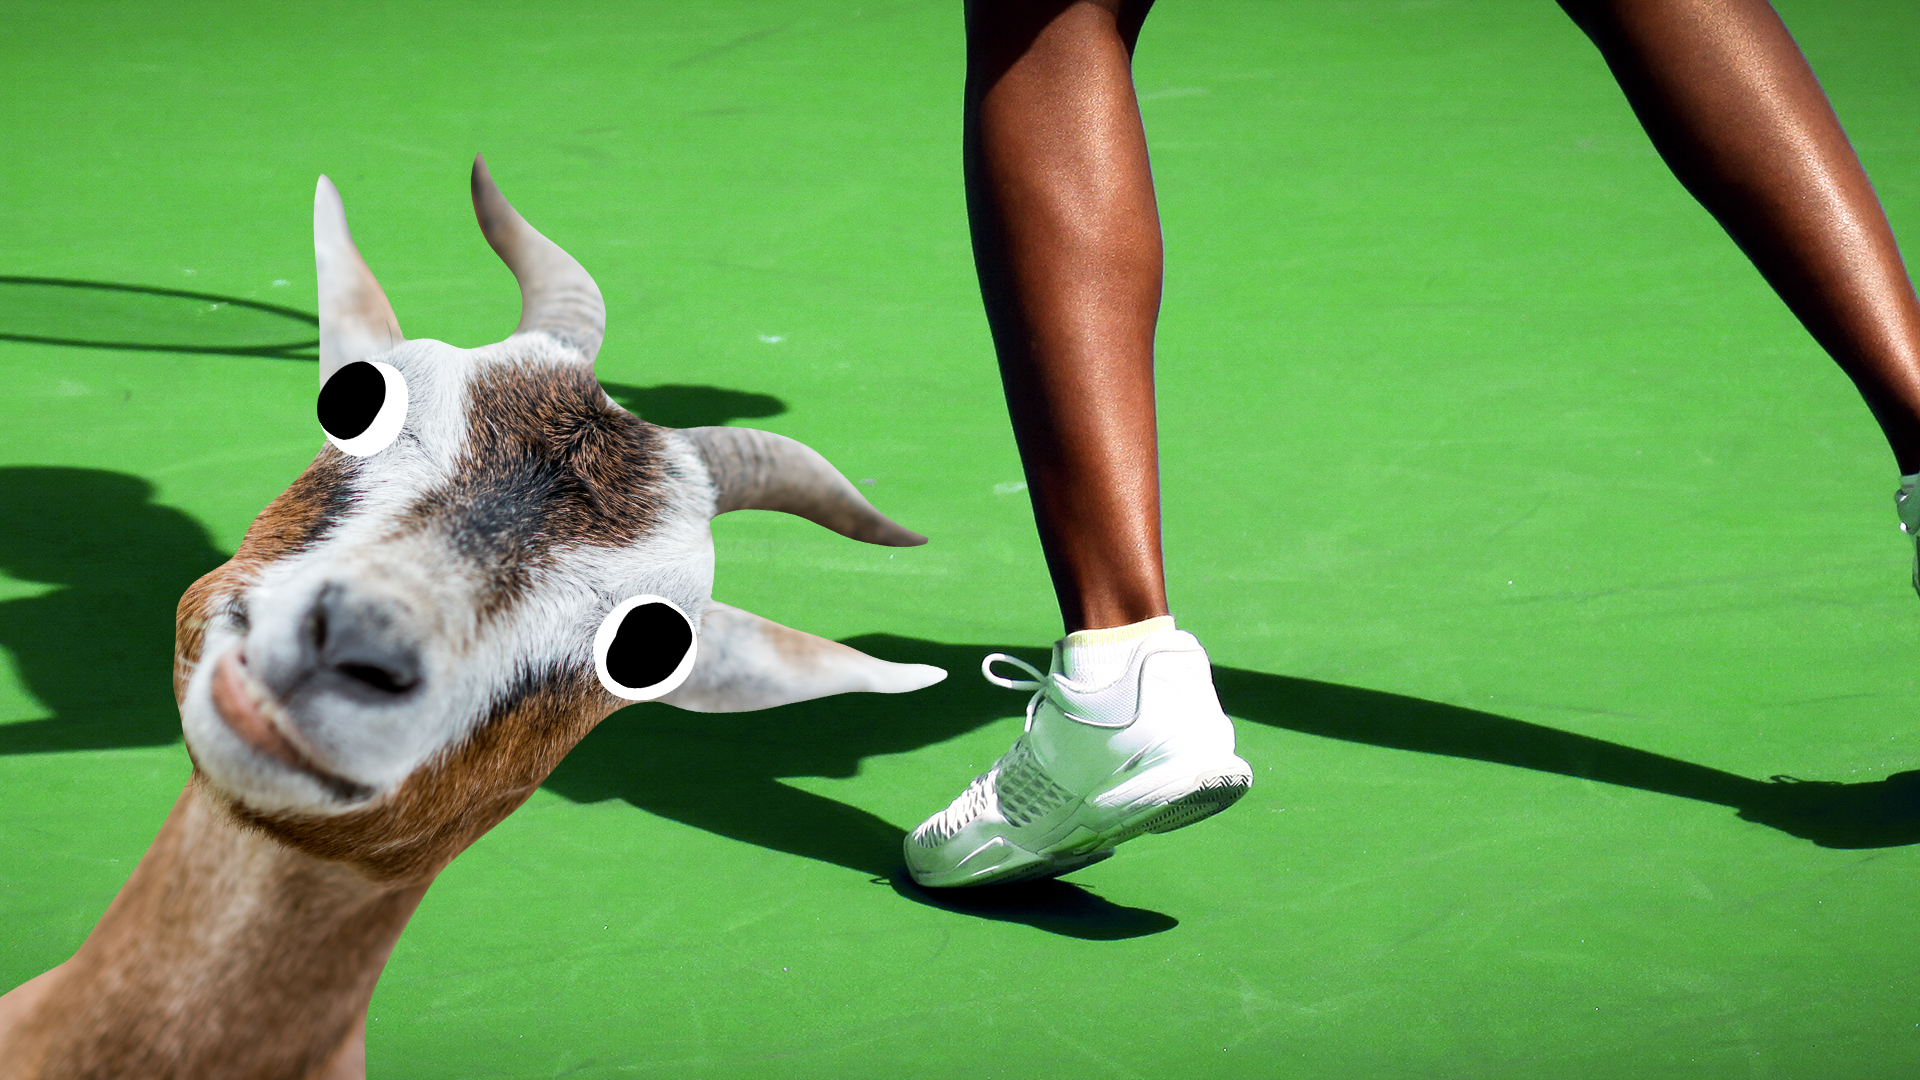 Woman's feet playing tennis with derpy goat